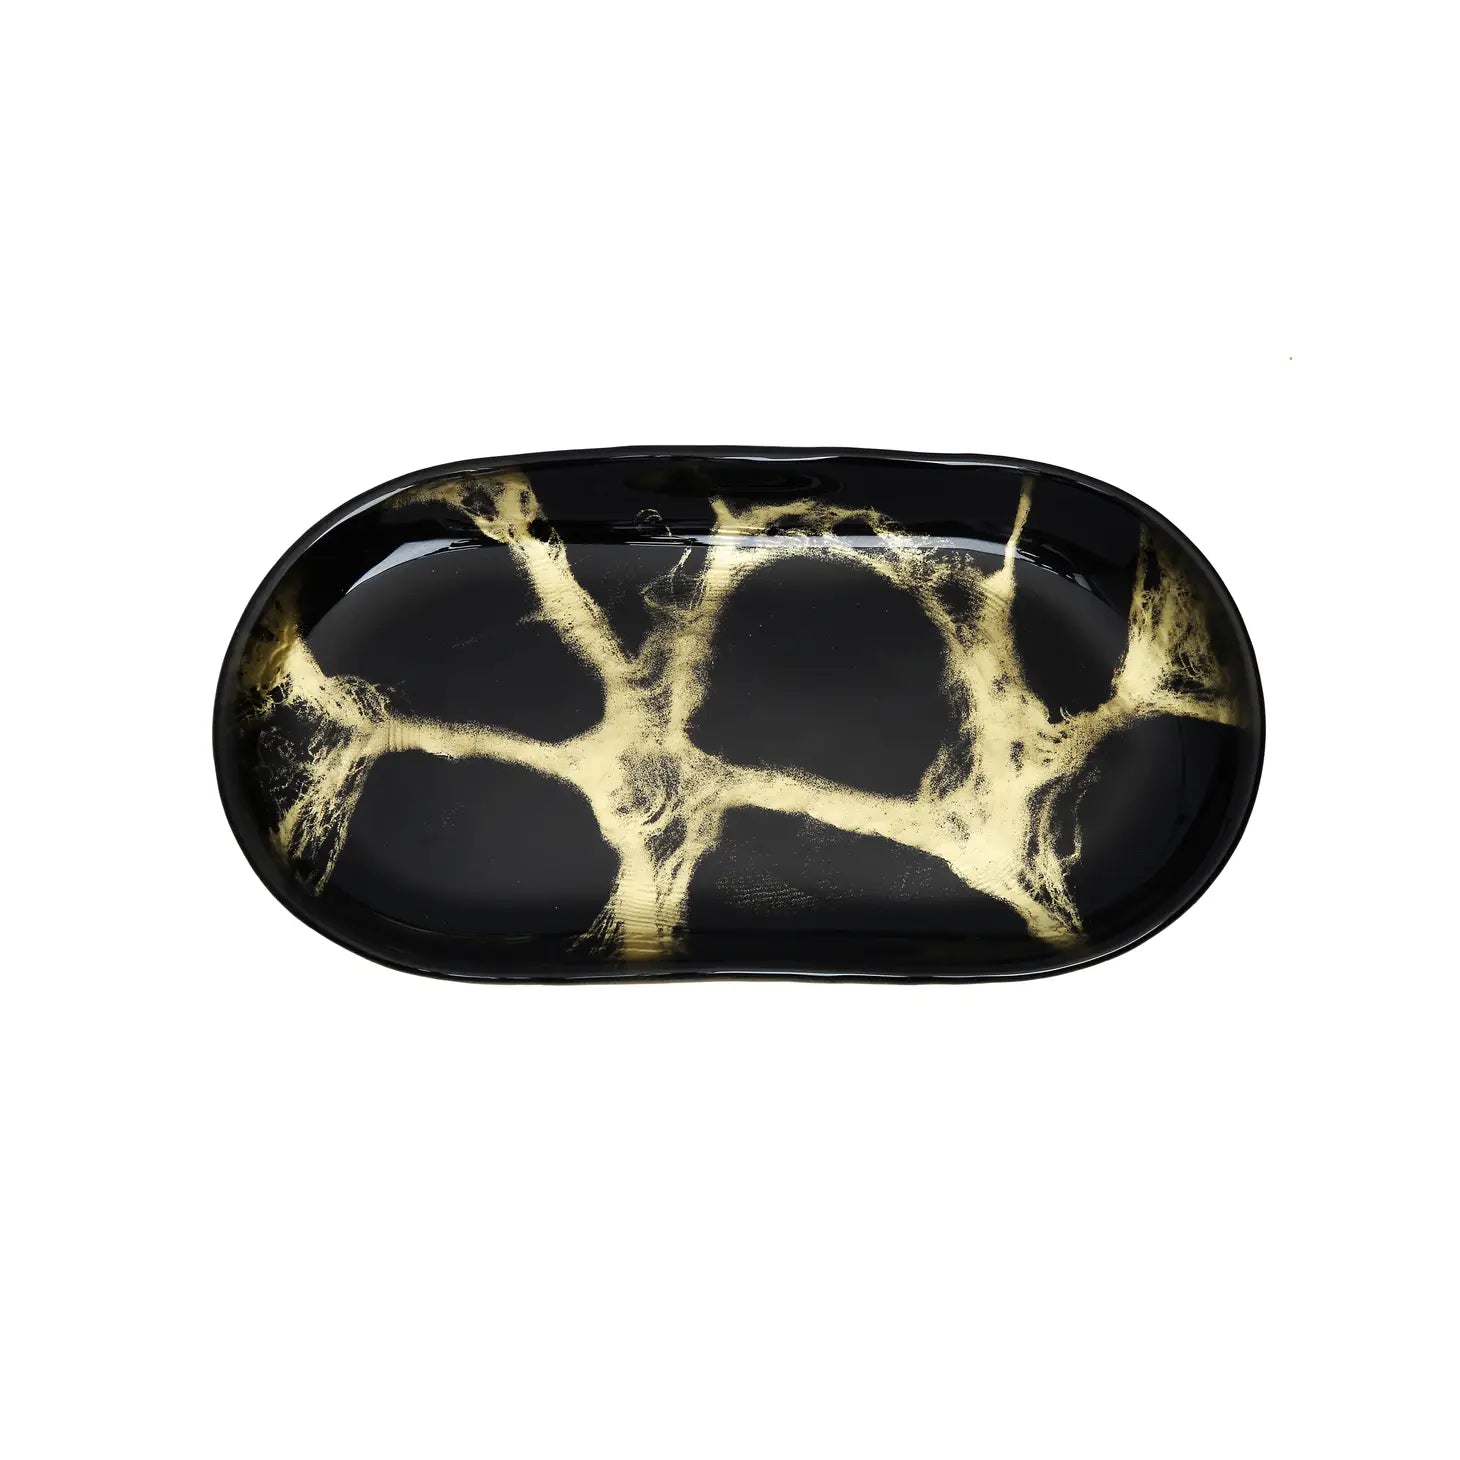 Black and Gold Marbleized Oval Dish 13.75"